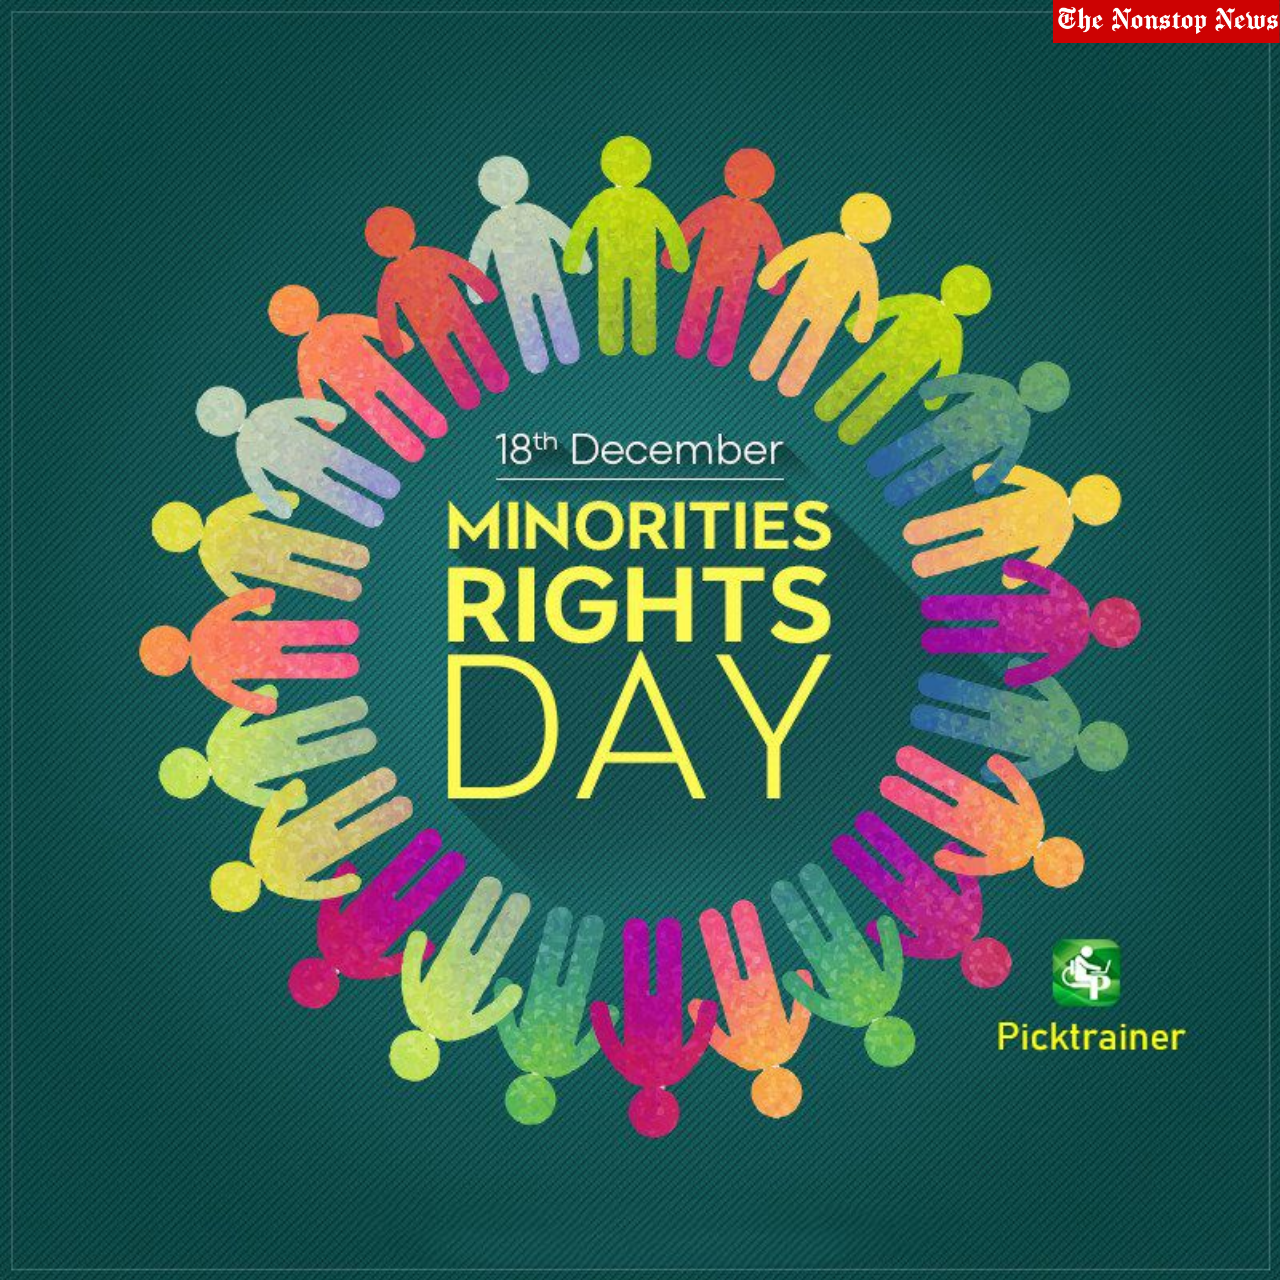 Minorities Rights Day 2022 Quotes, Images, Messages, Slogans, Posters, Banners, and Captions